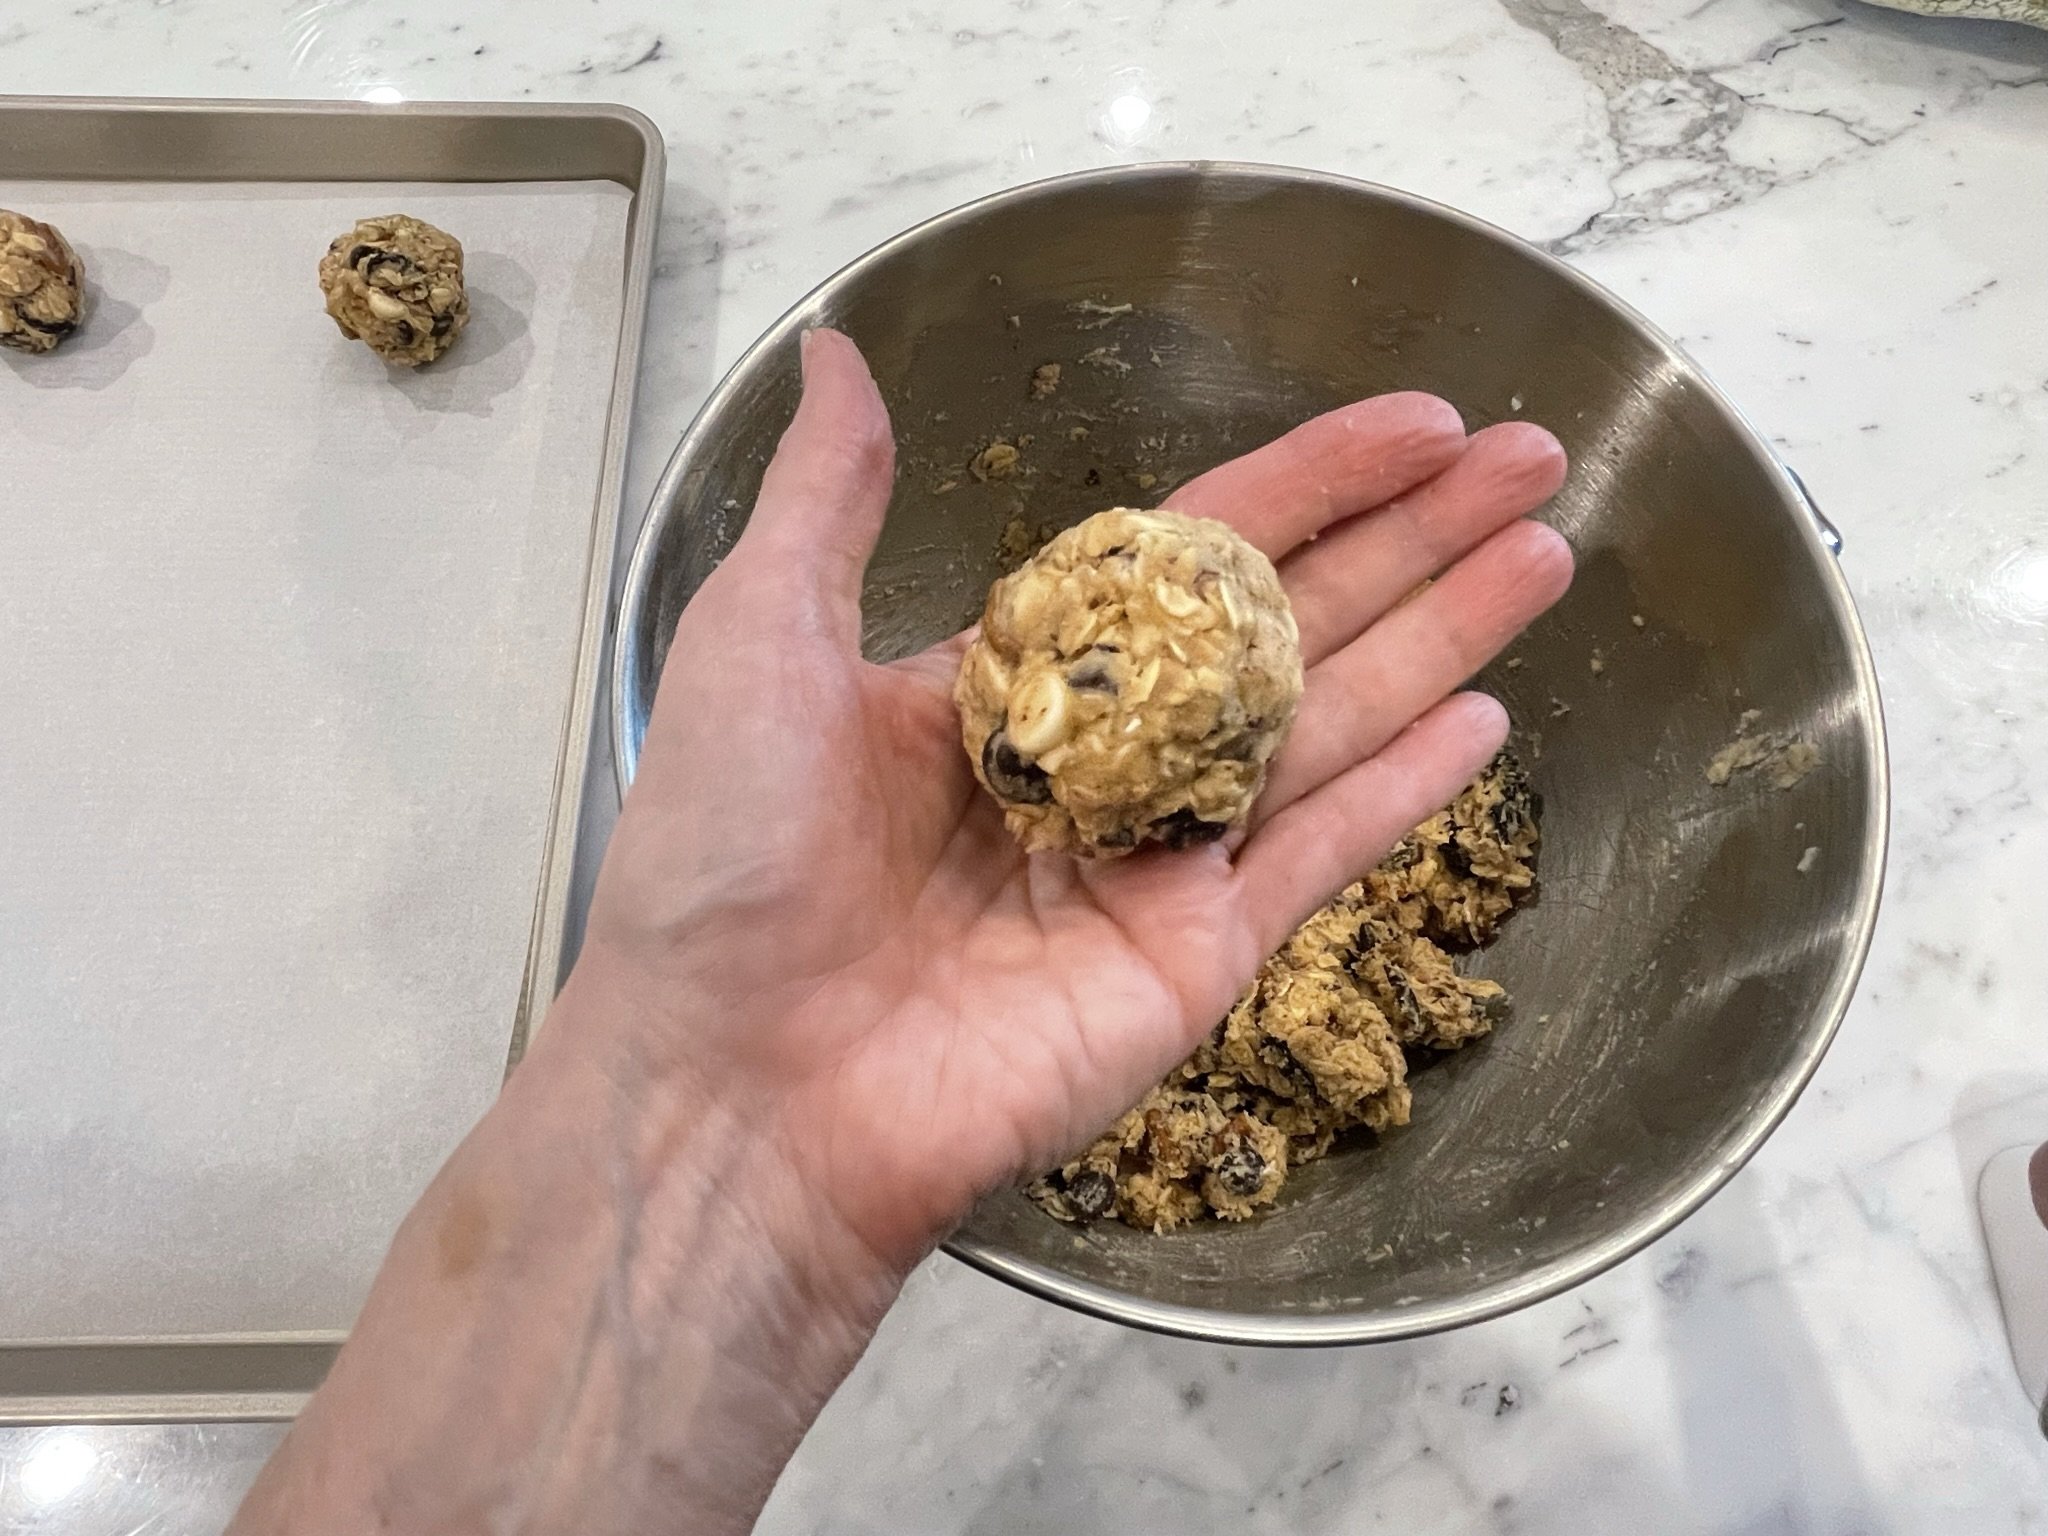 Ball of cookie dough.